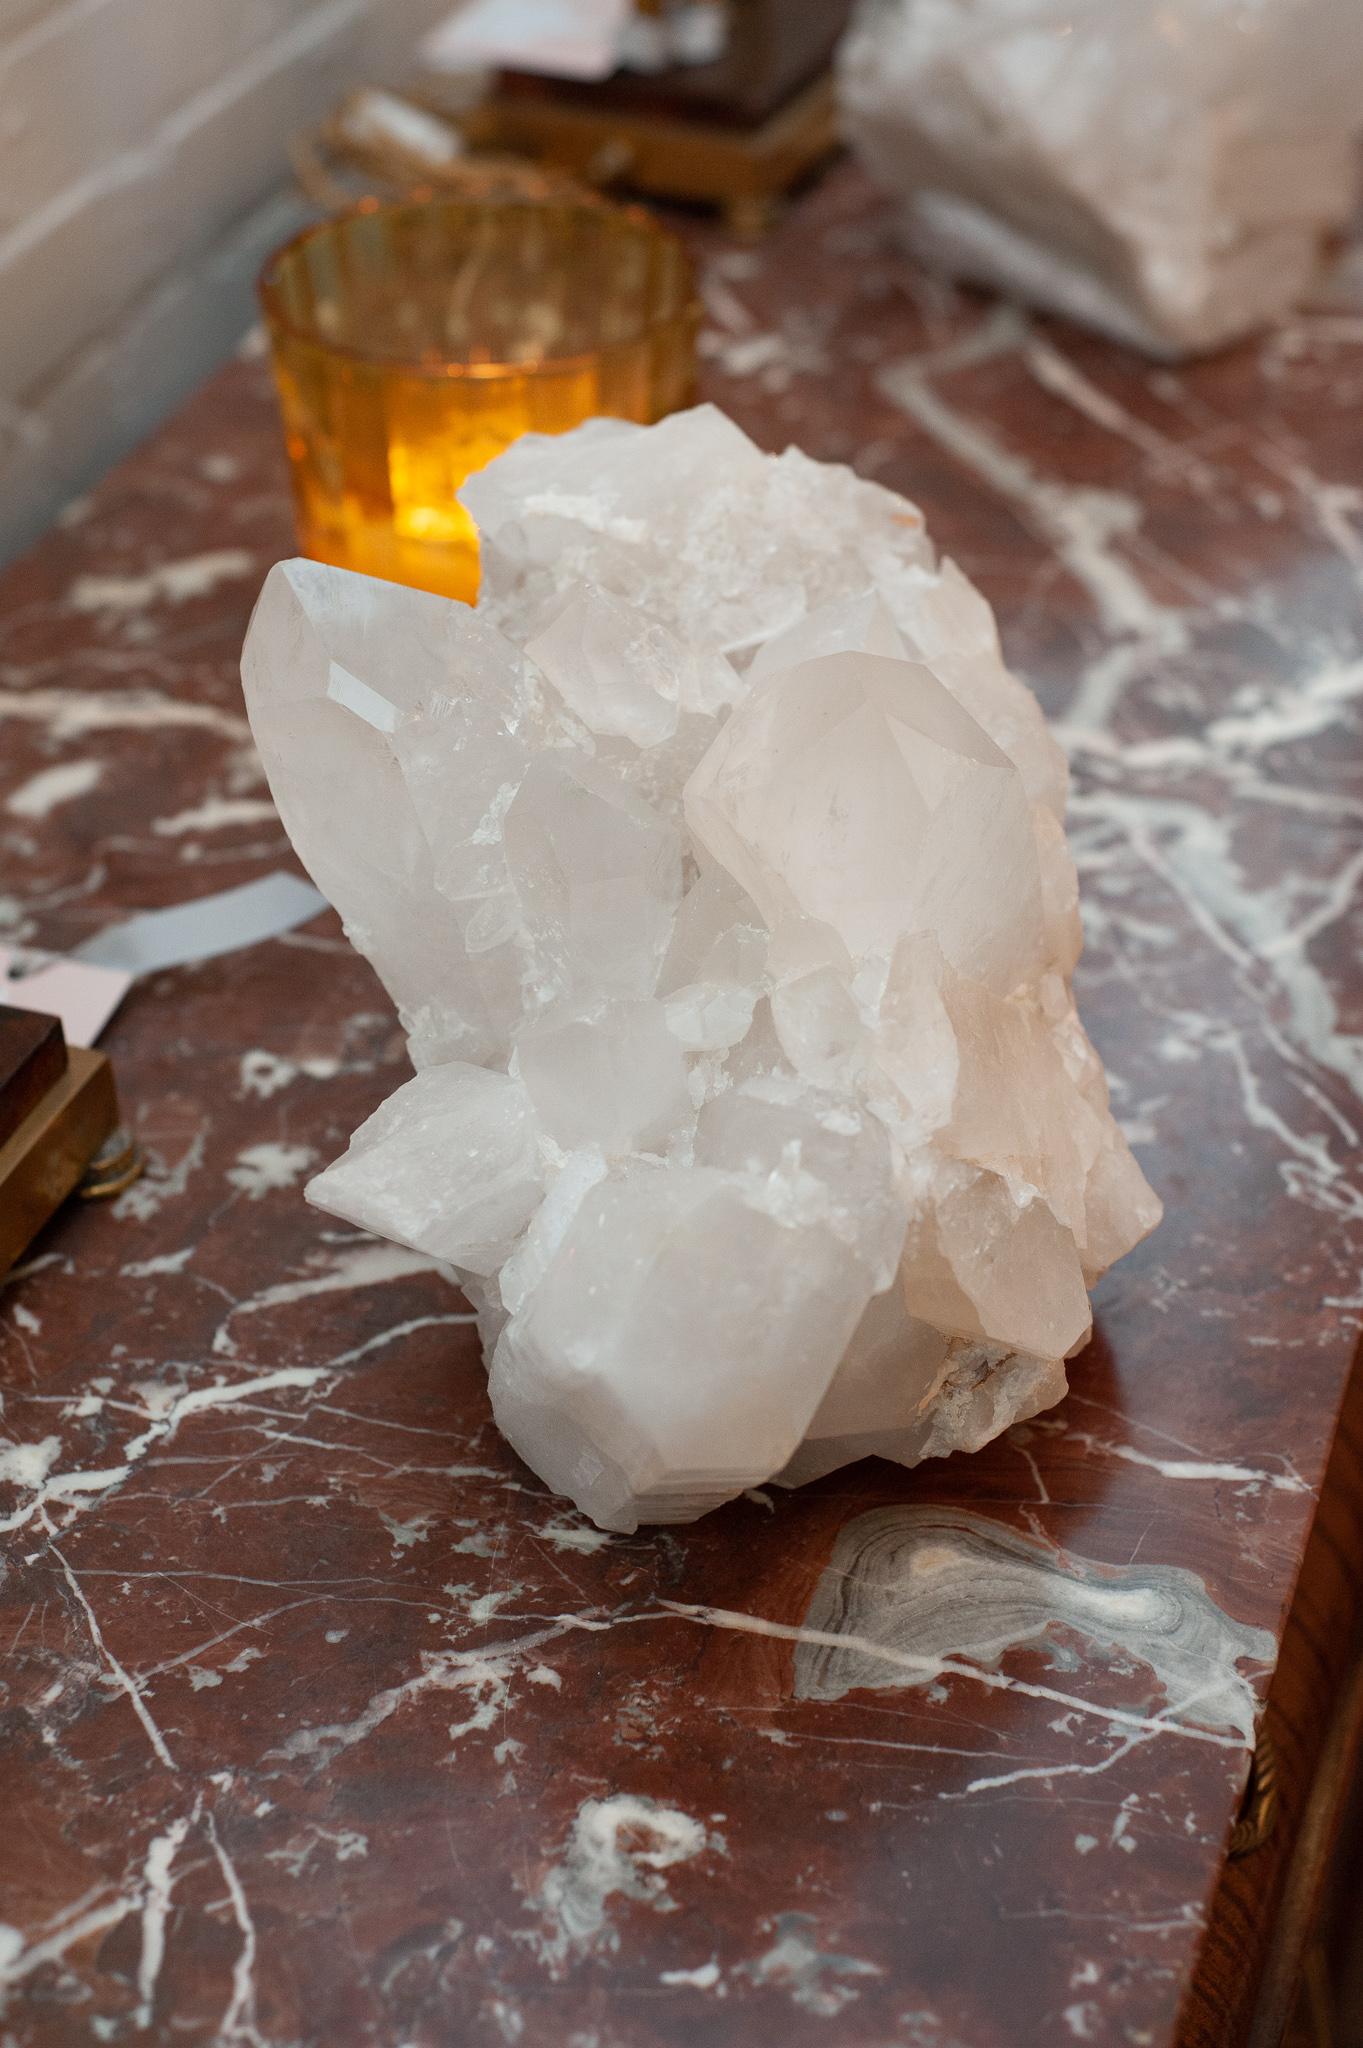 A massive contemporary rock crystal point cluster, weighing in over 18 pounds. Huge central crystal points are surrounded by smaller points in this one of a kind natural specimen. Rock crystal has long been used in decoration and many ornate pieces